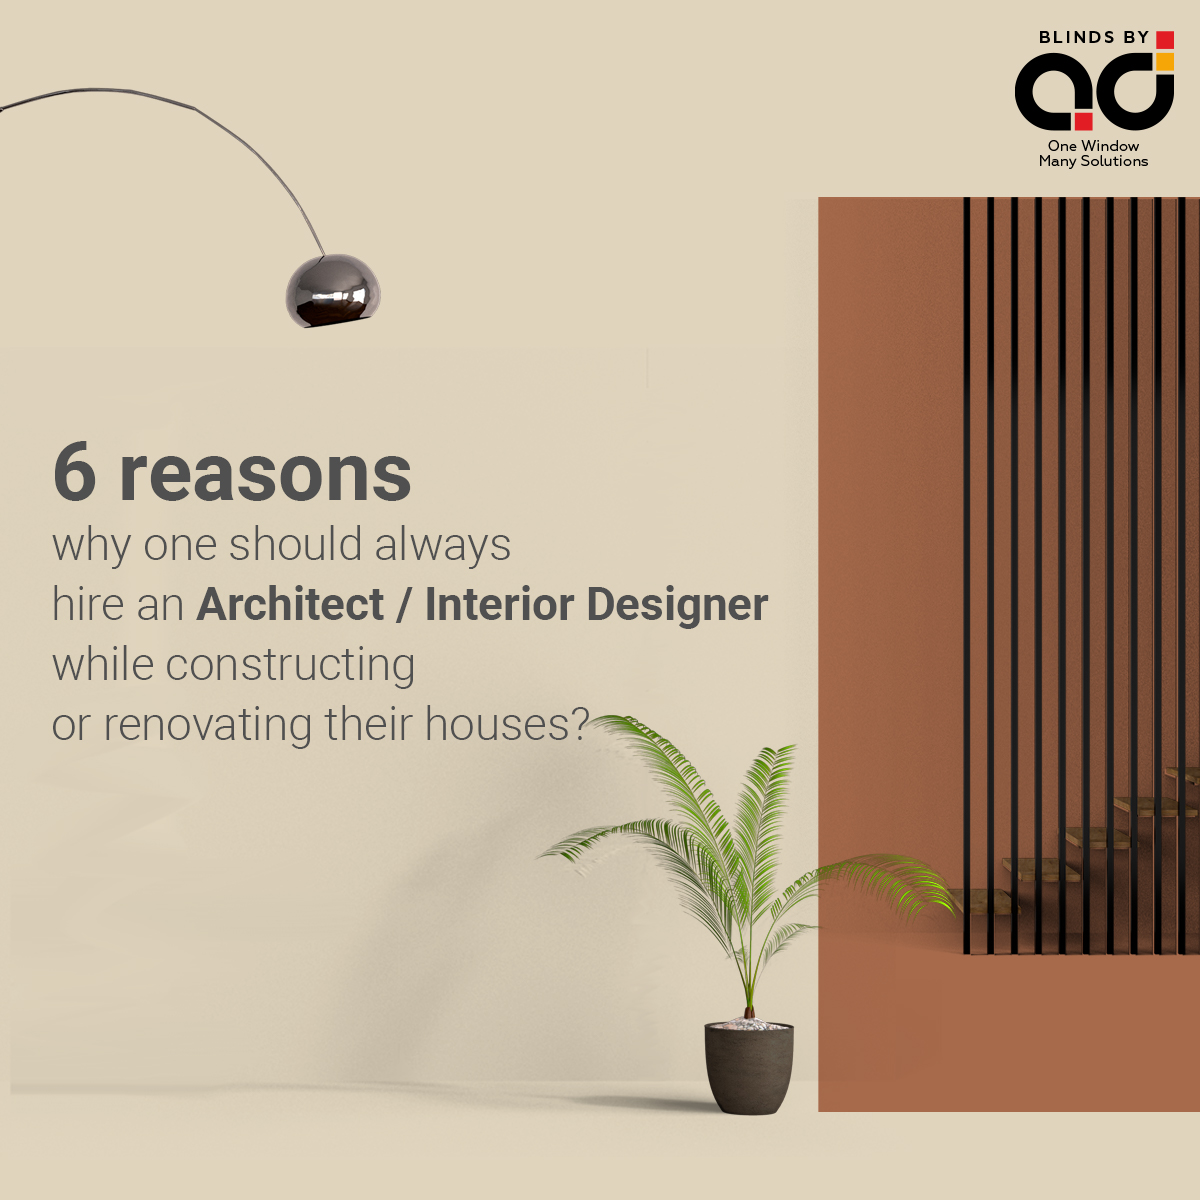 6 reasons why one should always hire an Architect / Interior Designer while constructing or renovating their houses?